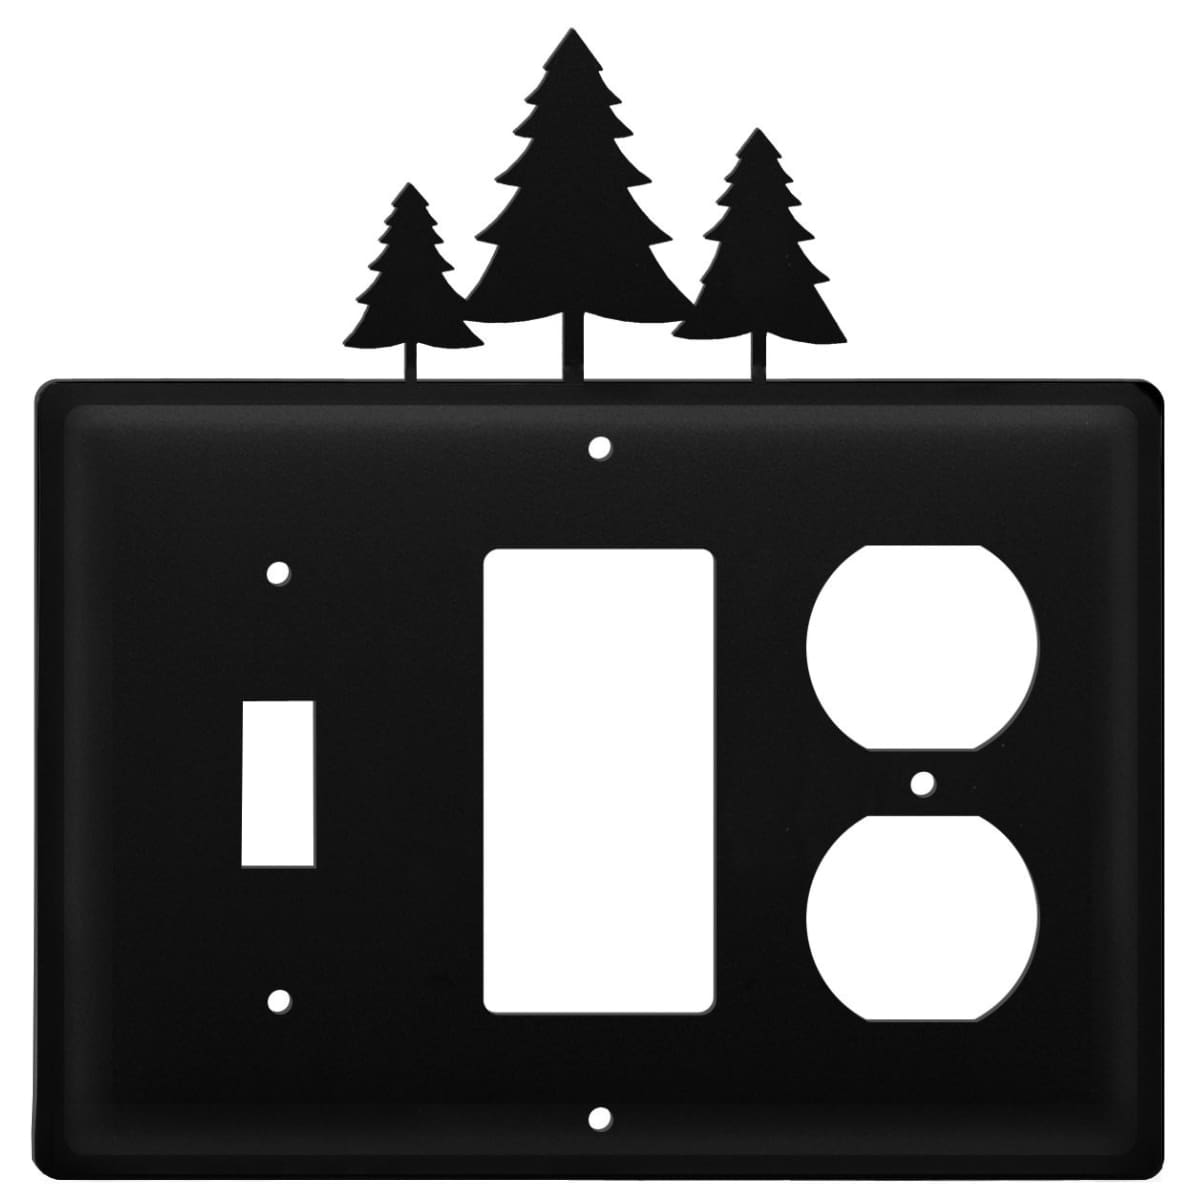 Triple Pine Trees Single Switch GFI and Outlet Cover CUSTOM Product